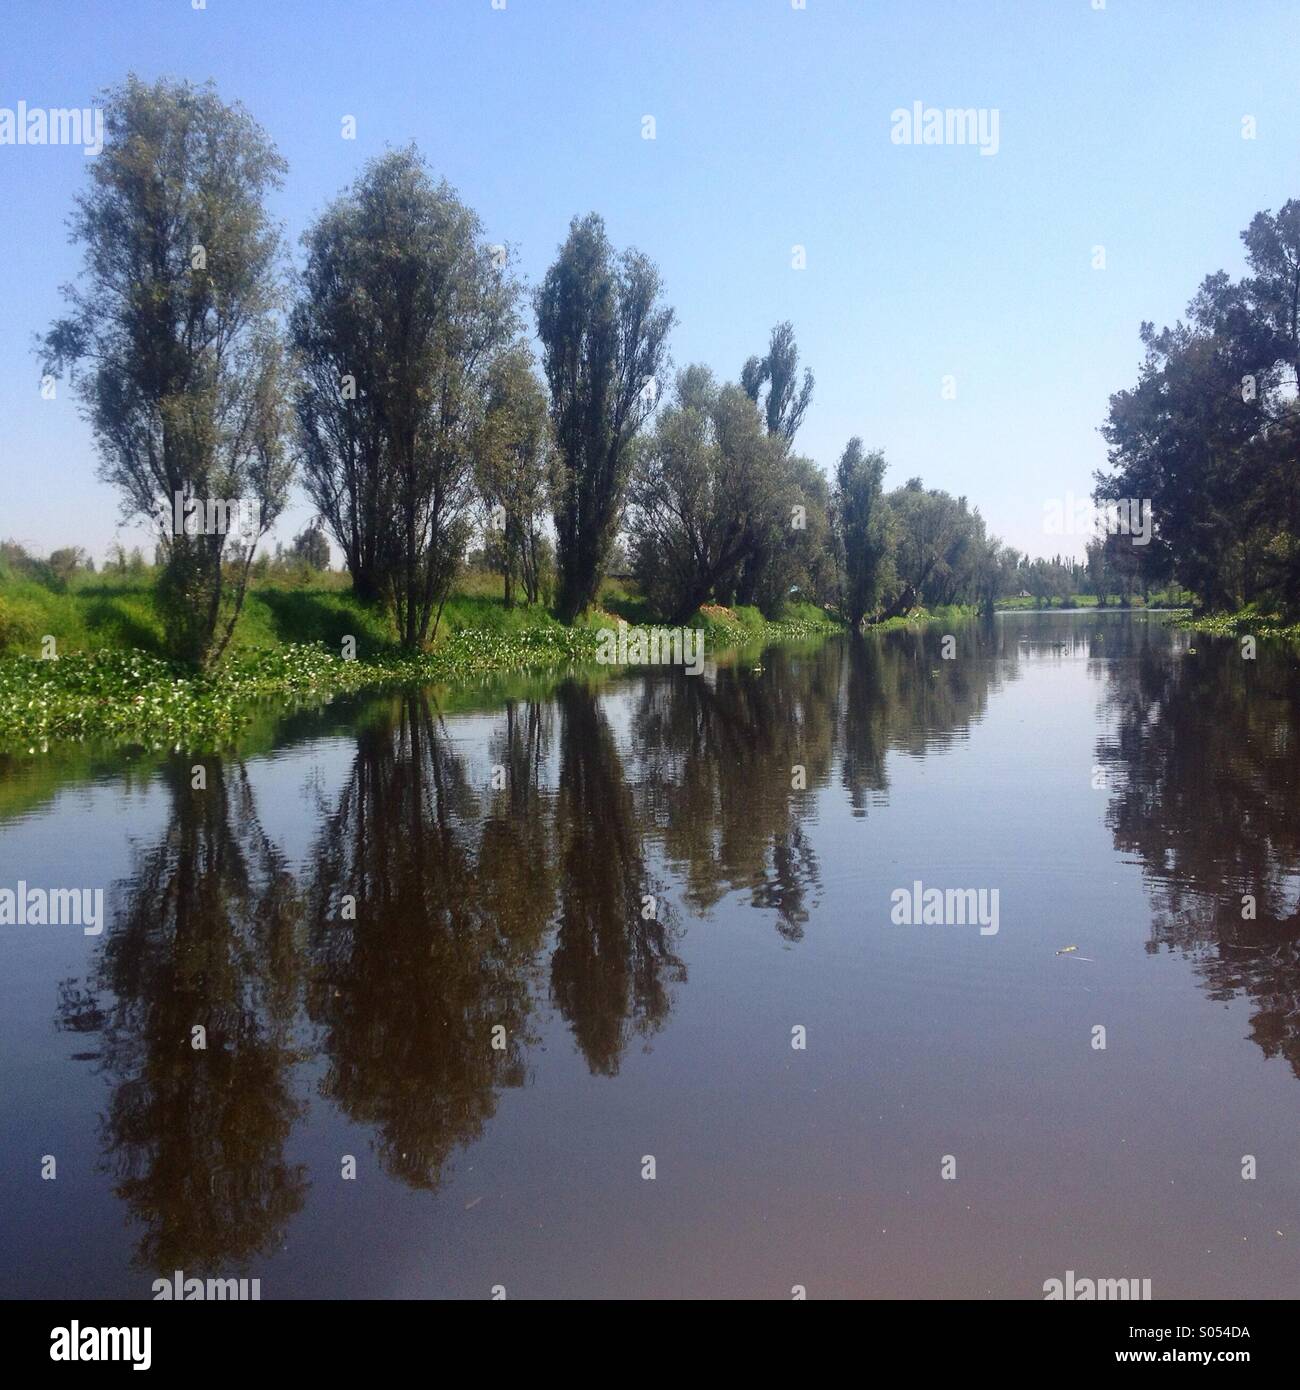 Reflection of the trees in the water of Xochimilco lake, Mexico City, Mexico Stock Photo